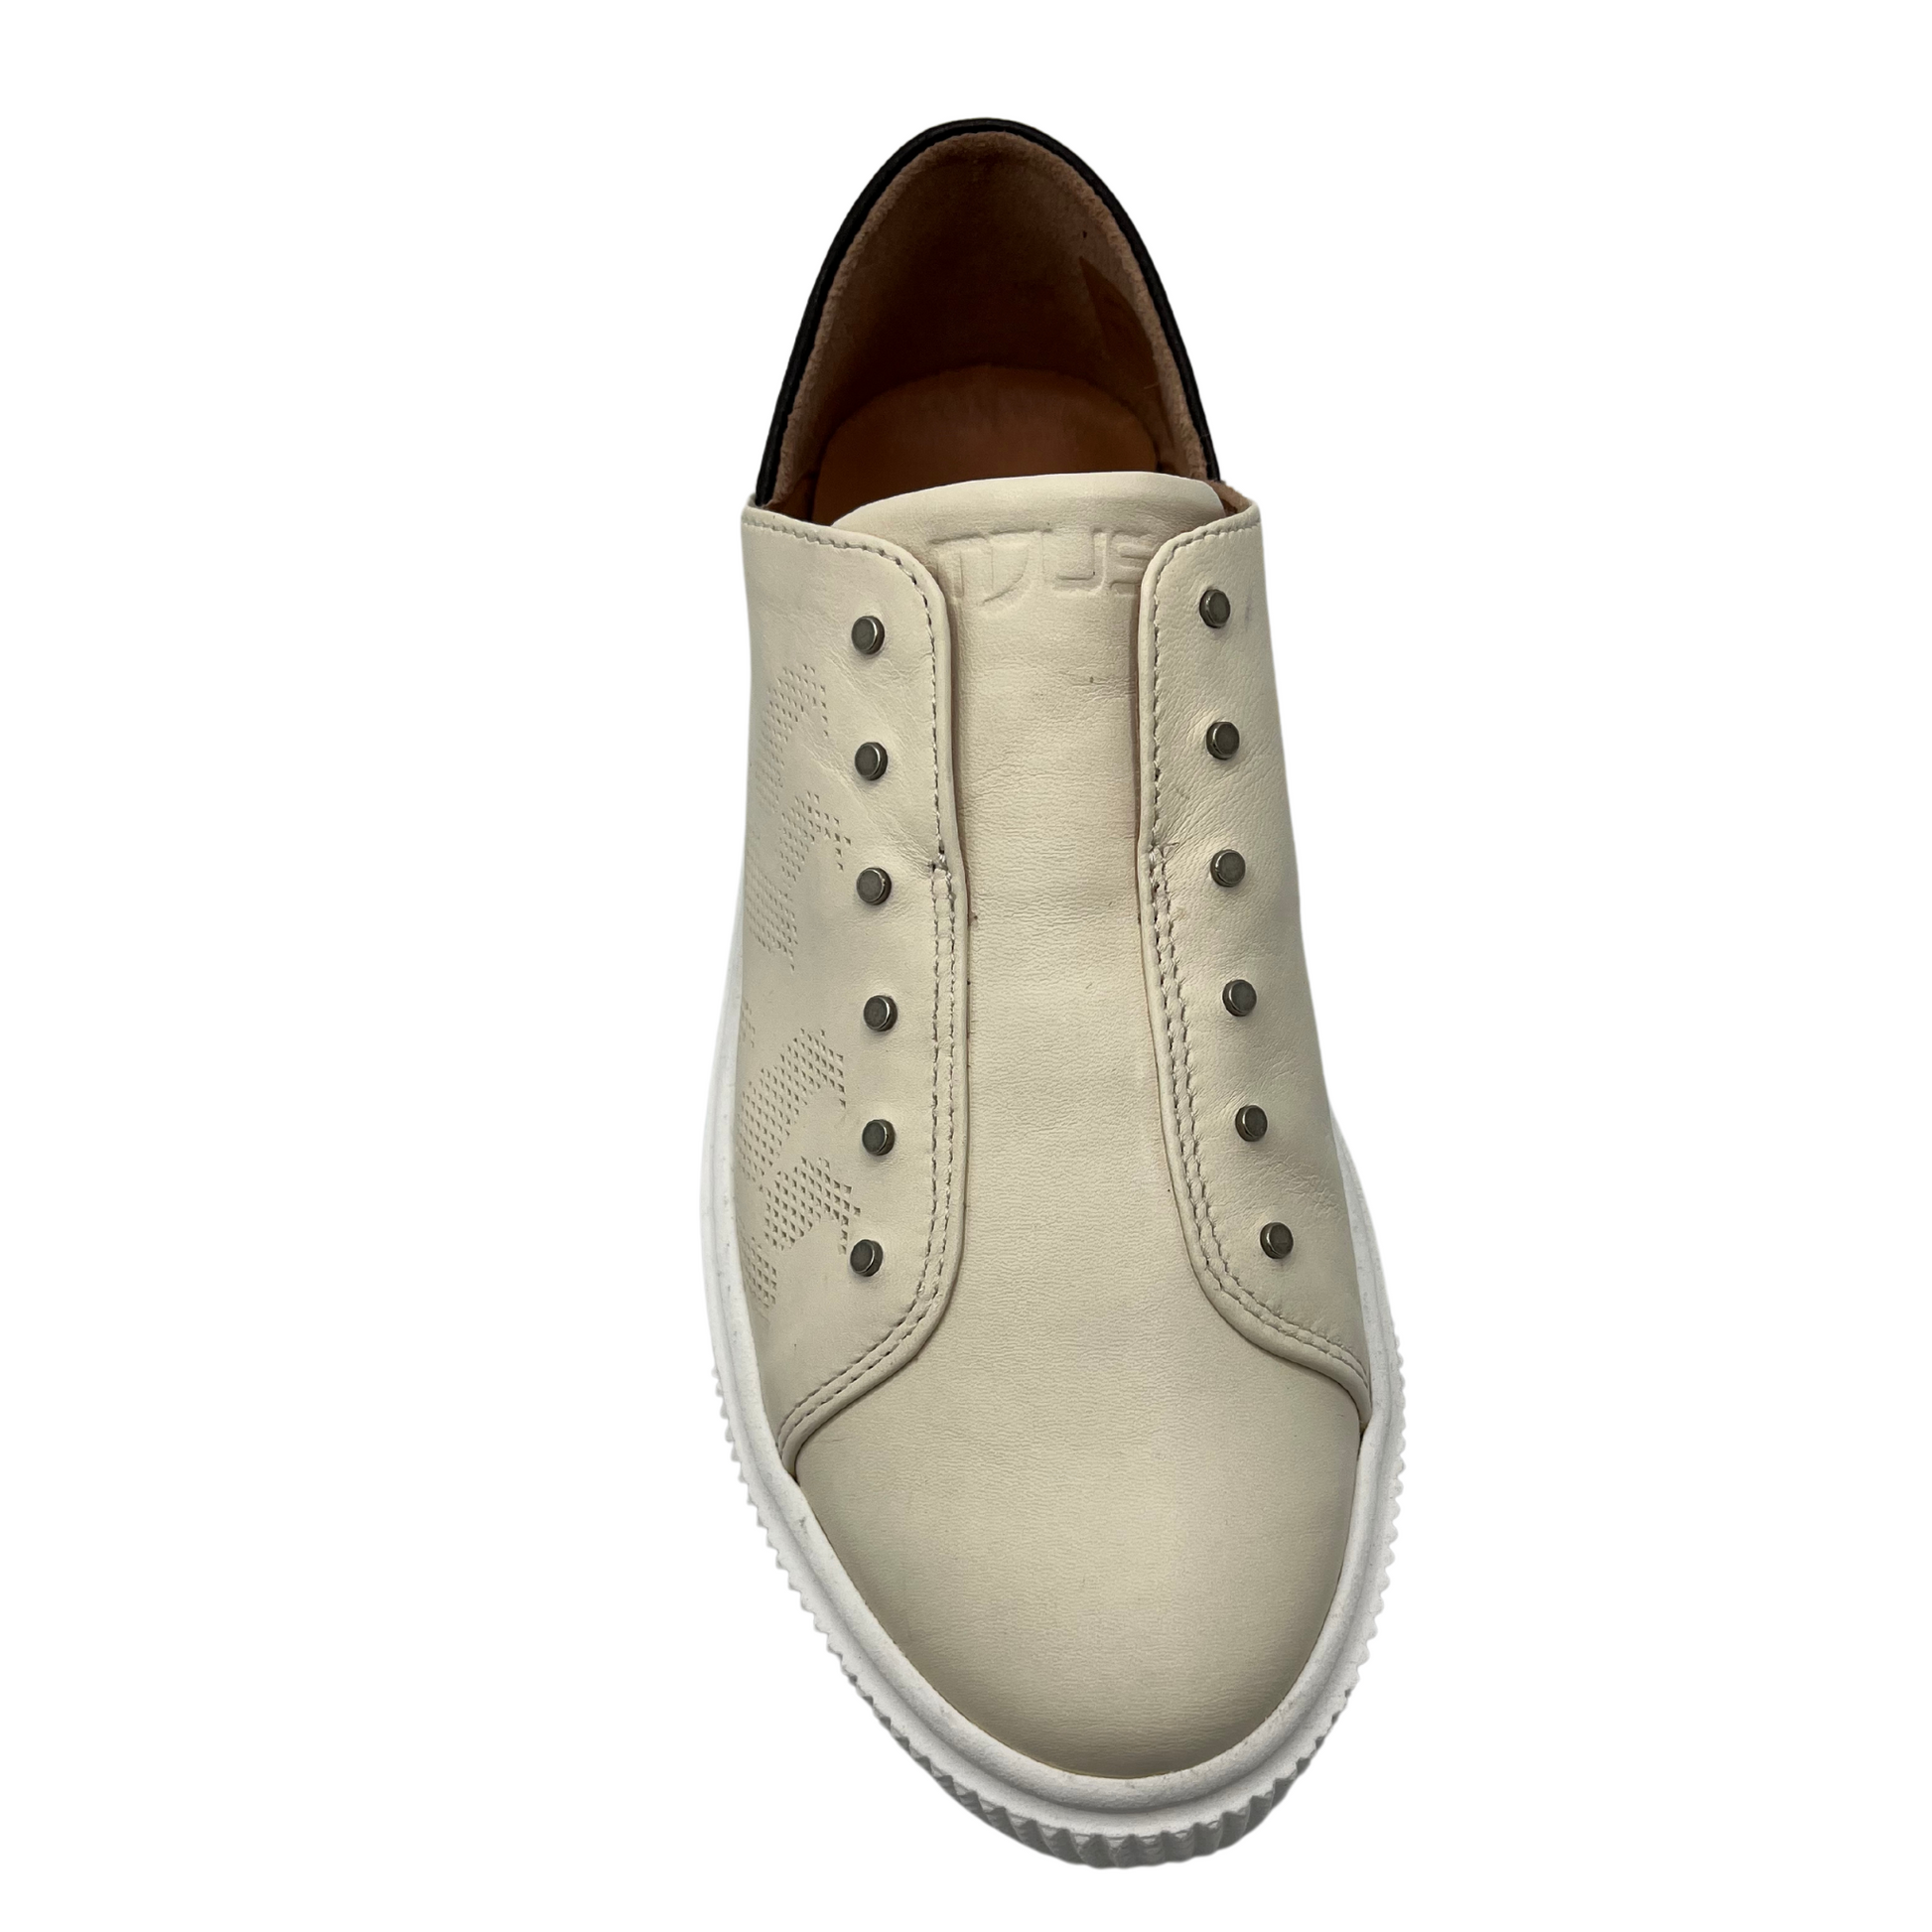 Top view of latte coloured sneaker with white rubber outsole